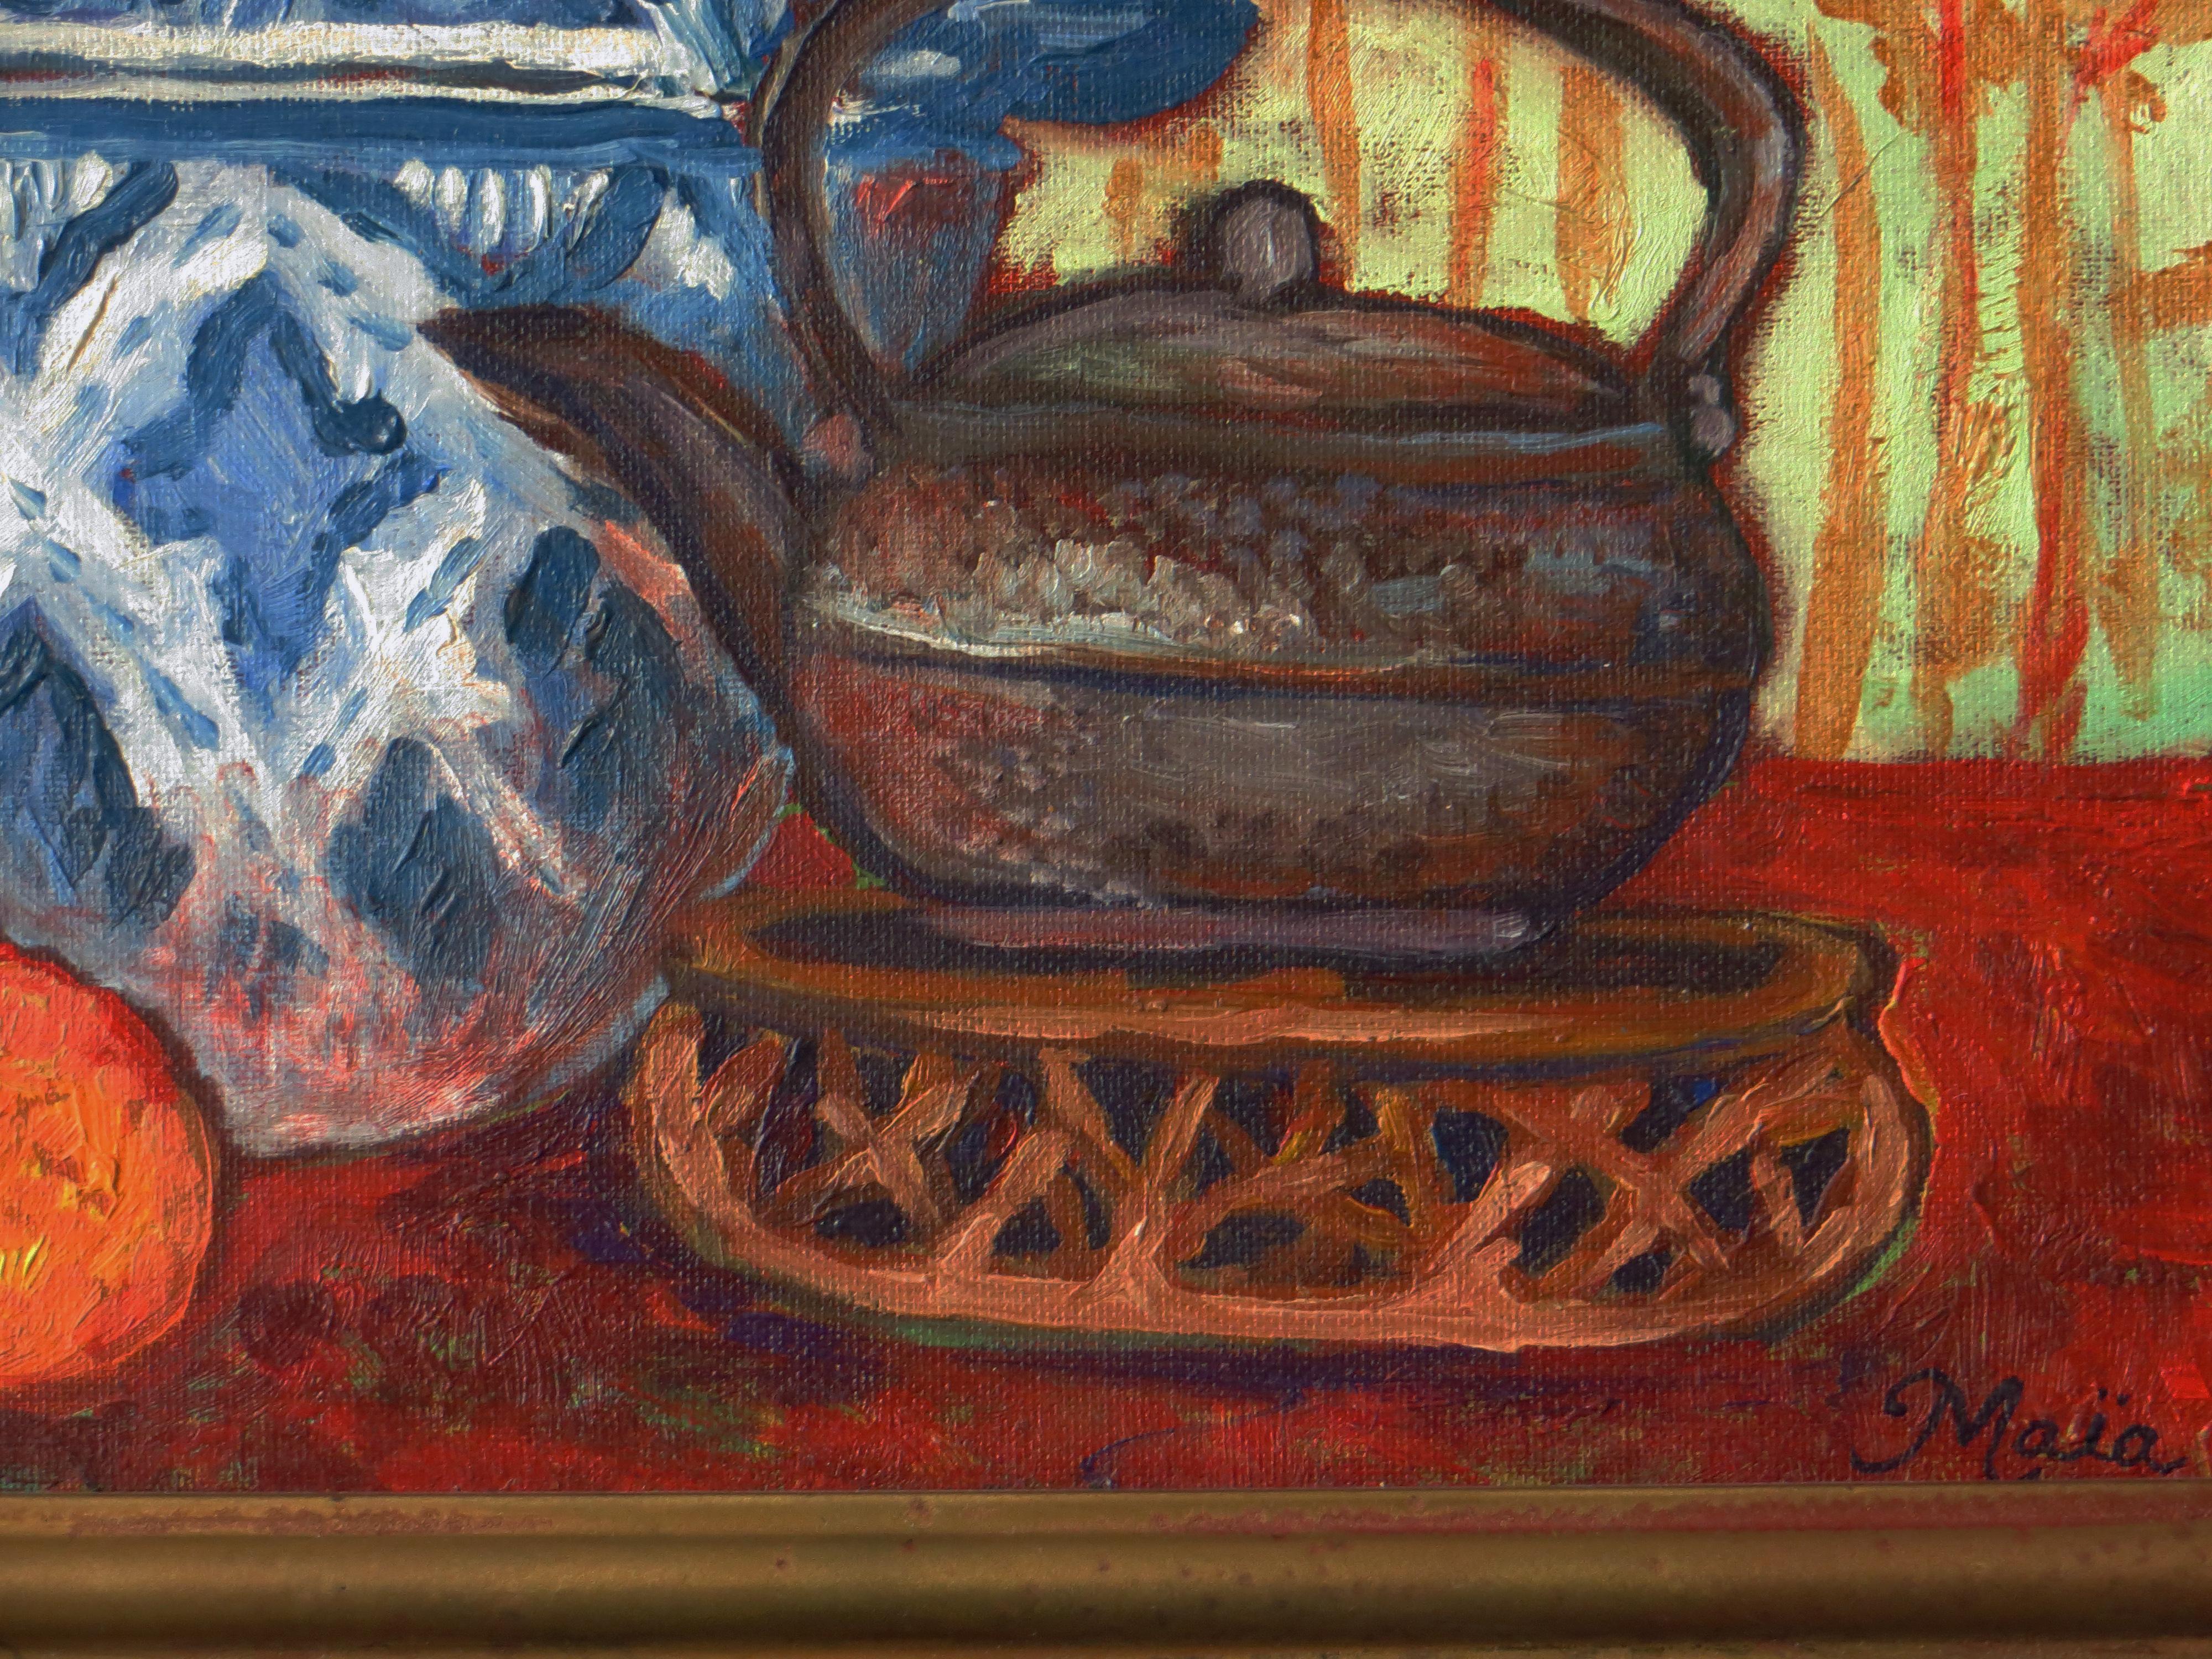 This beautiful still life is by the Montana/Idaho artist Maia Leisz. Leisz studied art extensively in the south of France and the influence of that region is evident in this impressionistic work. The patterned wallpaper and blue jar harken back to